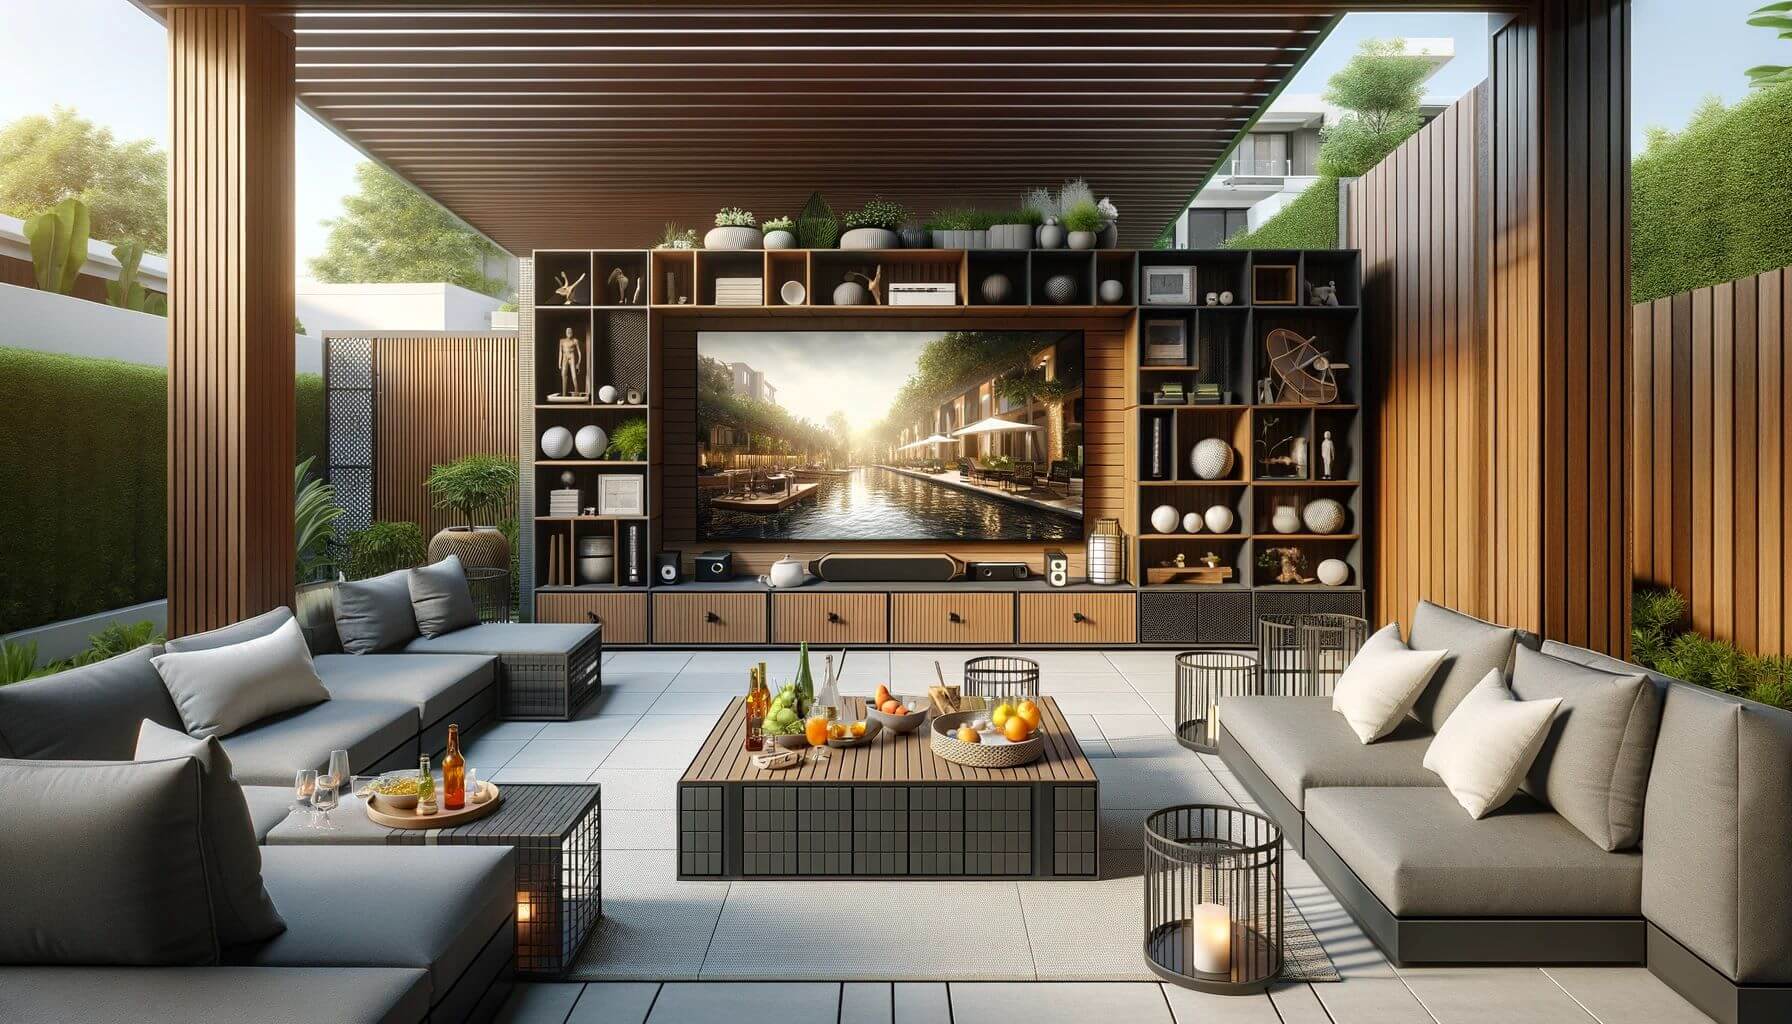 Configure modular units for a customizable entertainment space in your patio